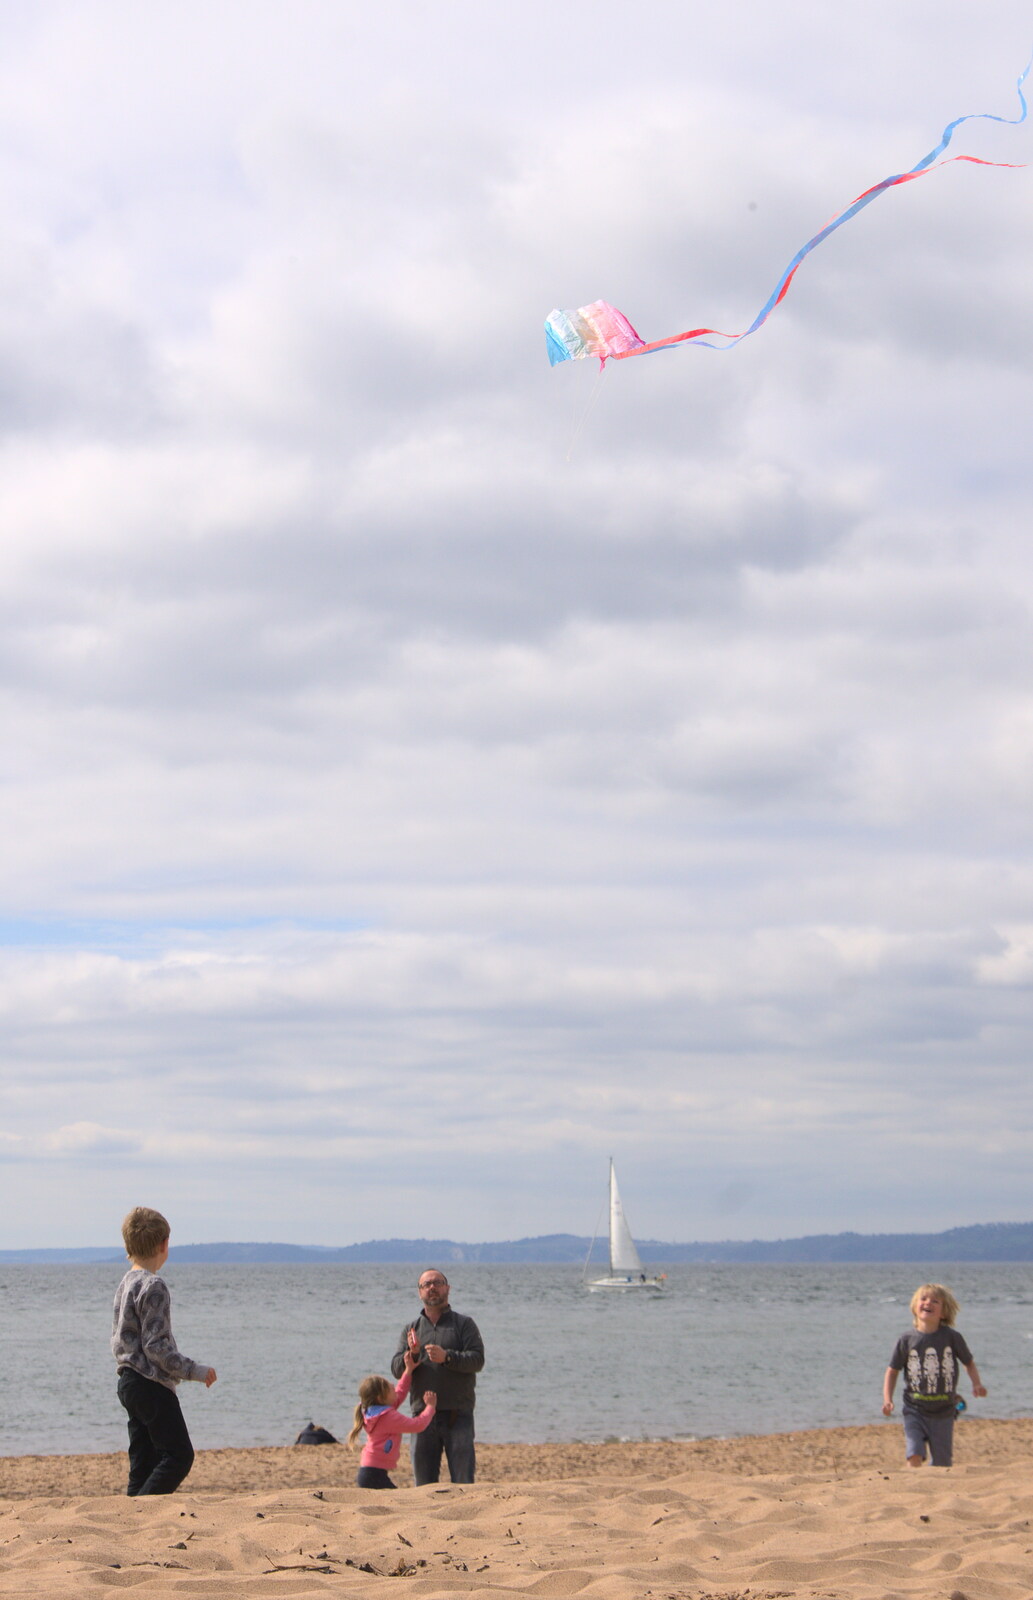 A kite is flown from Grandma J's and a Day on the Beach, Spreyton and Exmouth, Devon - 13th April 2017